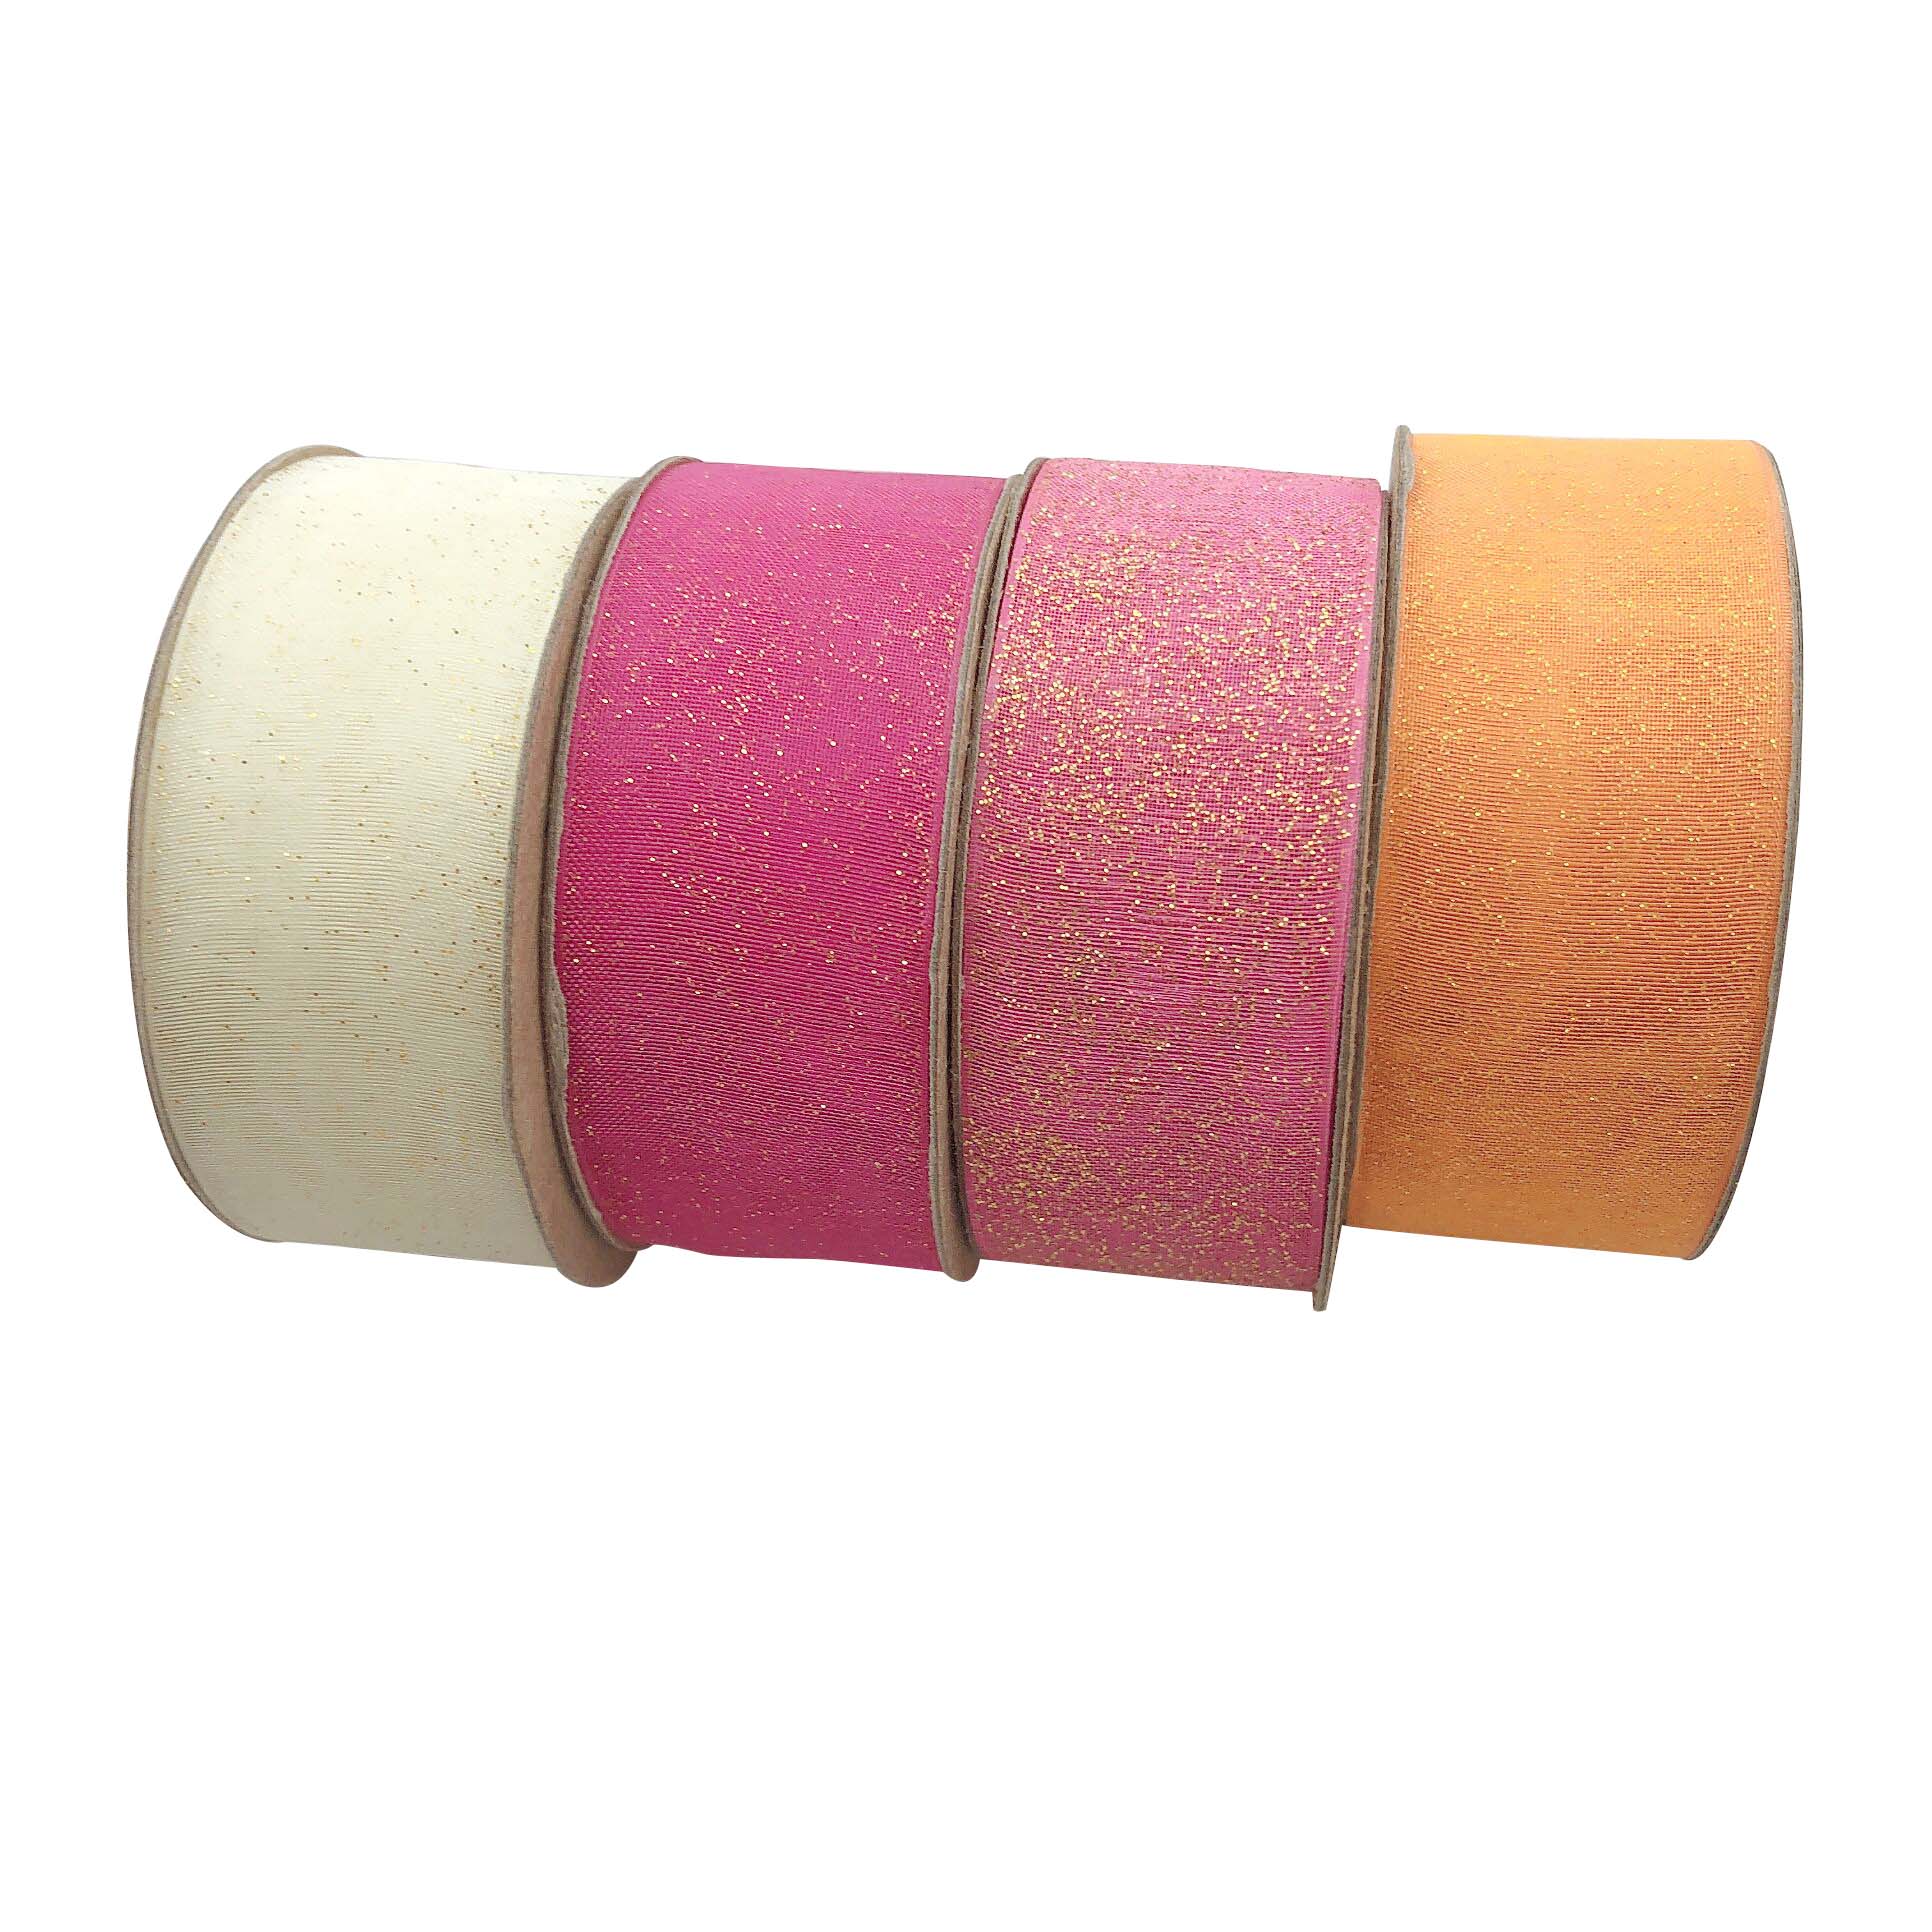 25mm Sheer Organza Ribbon Sprinkled With Gold Glitter